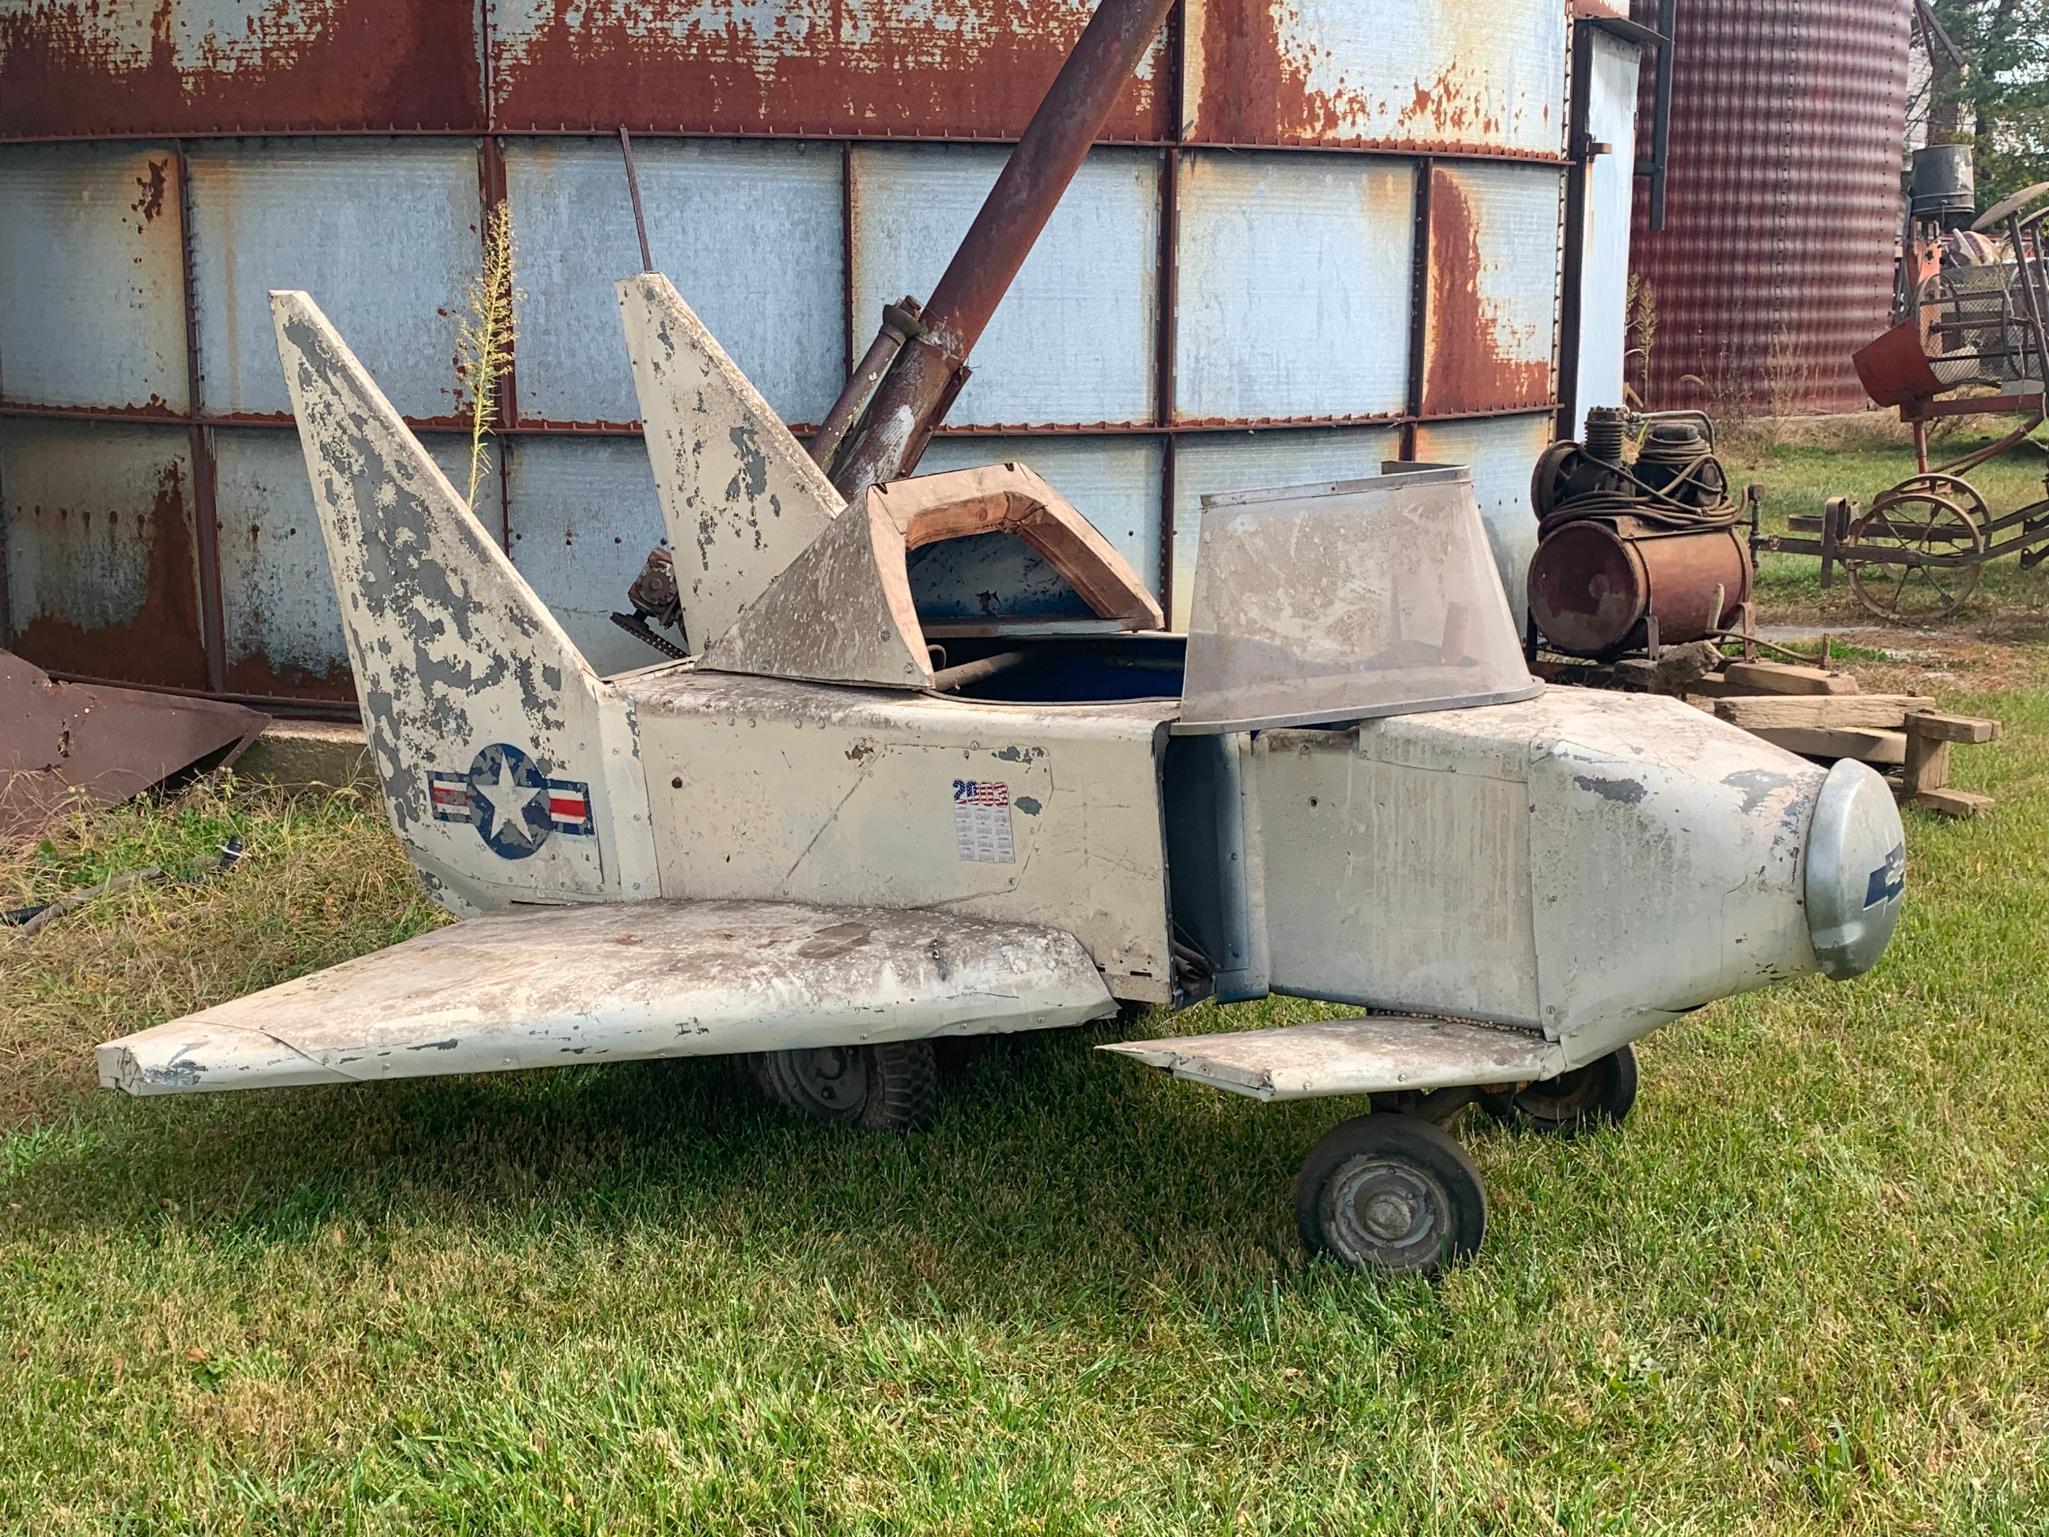 Home Built Fighter Plane by an Air Force Flight Instructor Positioned on a Lawn Mower Frame